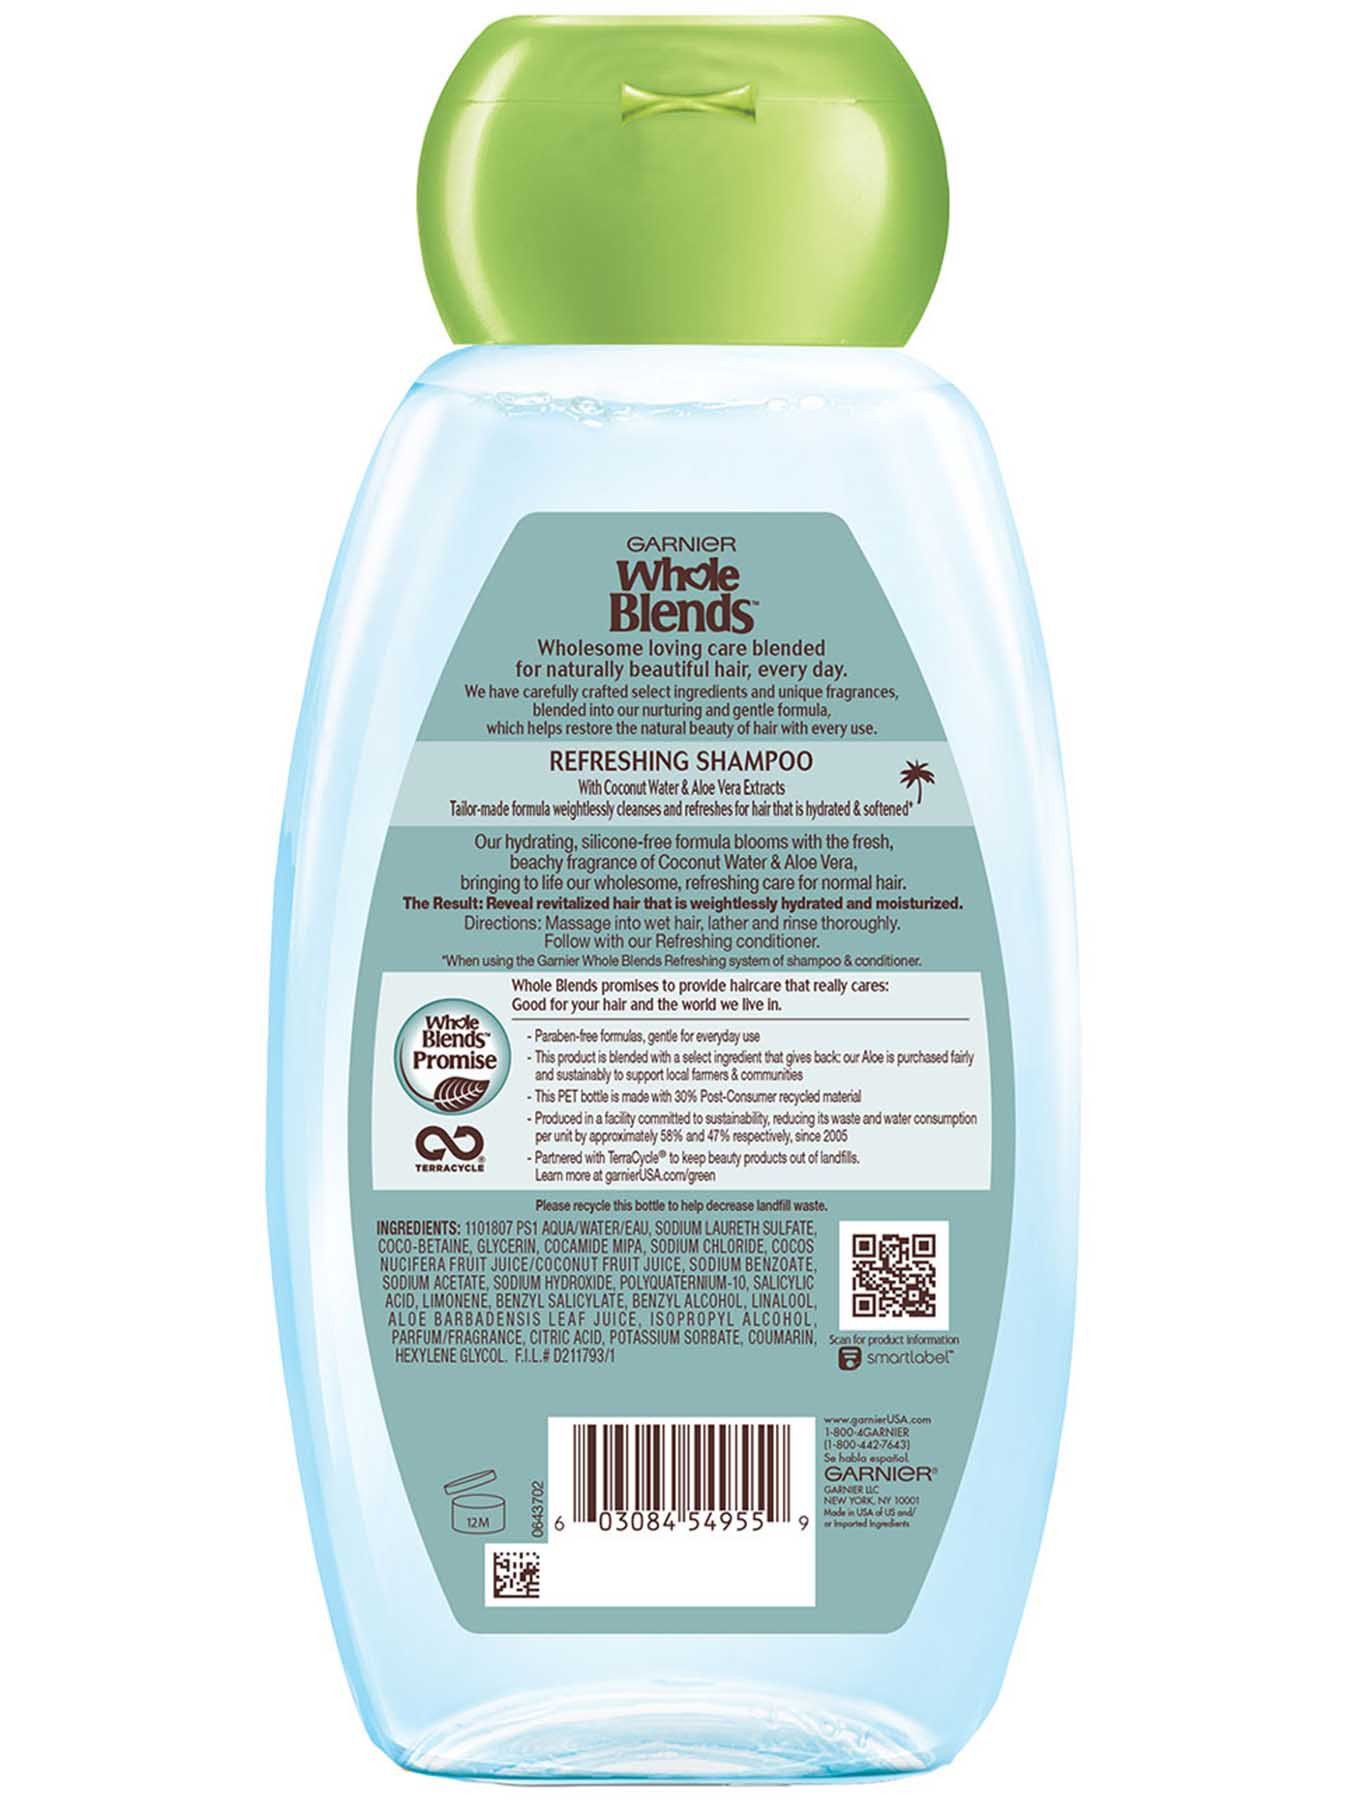 Back view of Hydrating Shampoo with Coconut Water & Aloe Vera extracts.